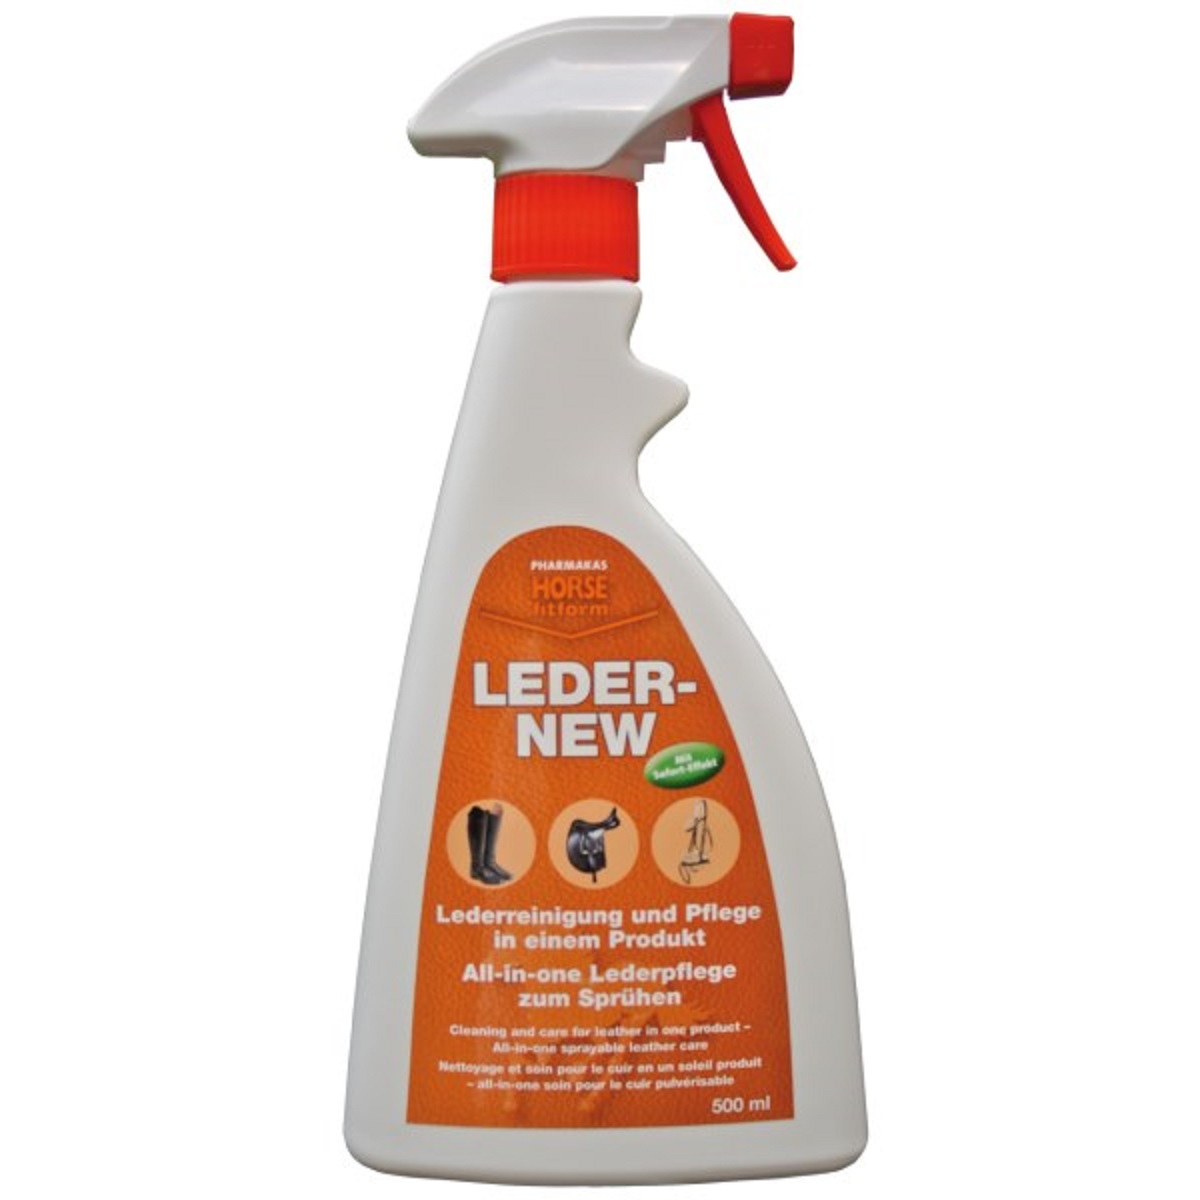 Leather-New Leather Cleaner & Care